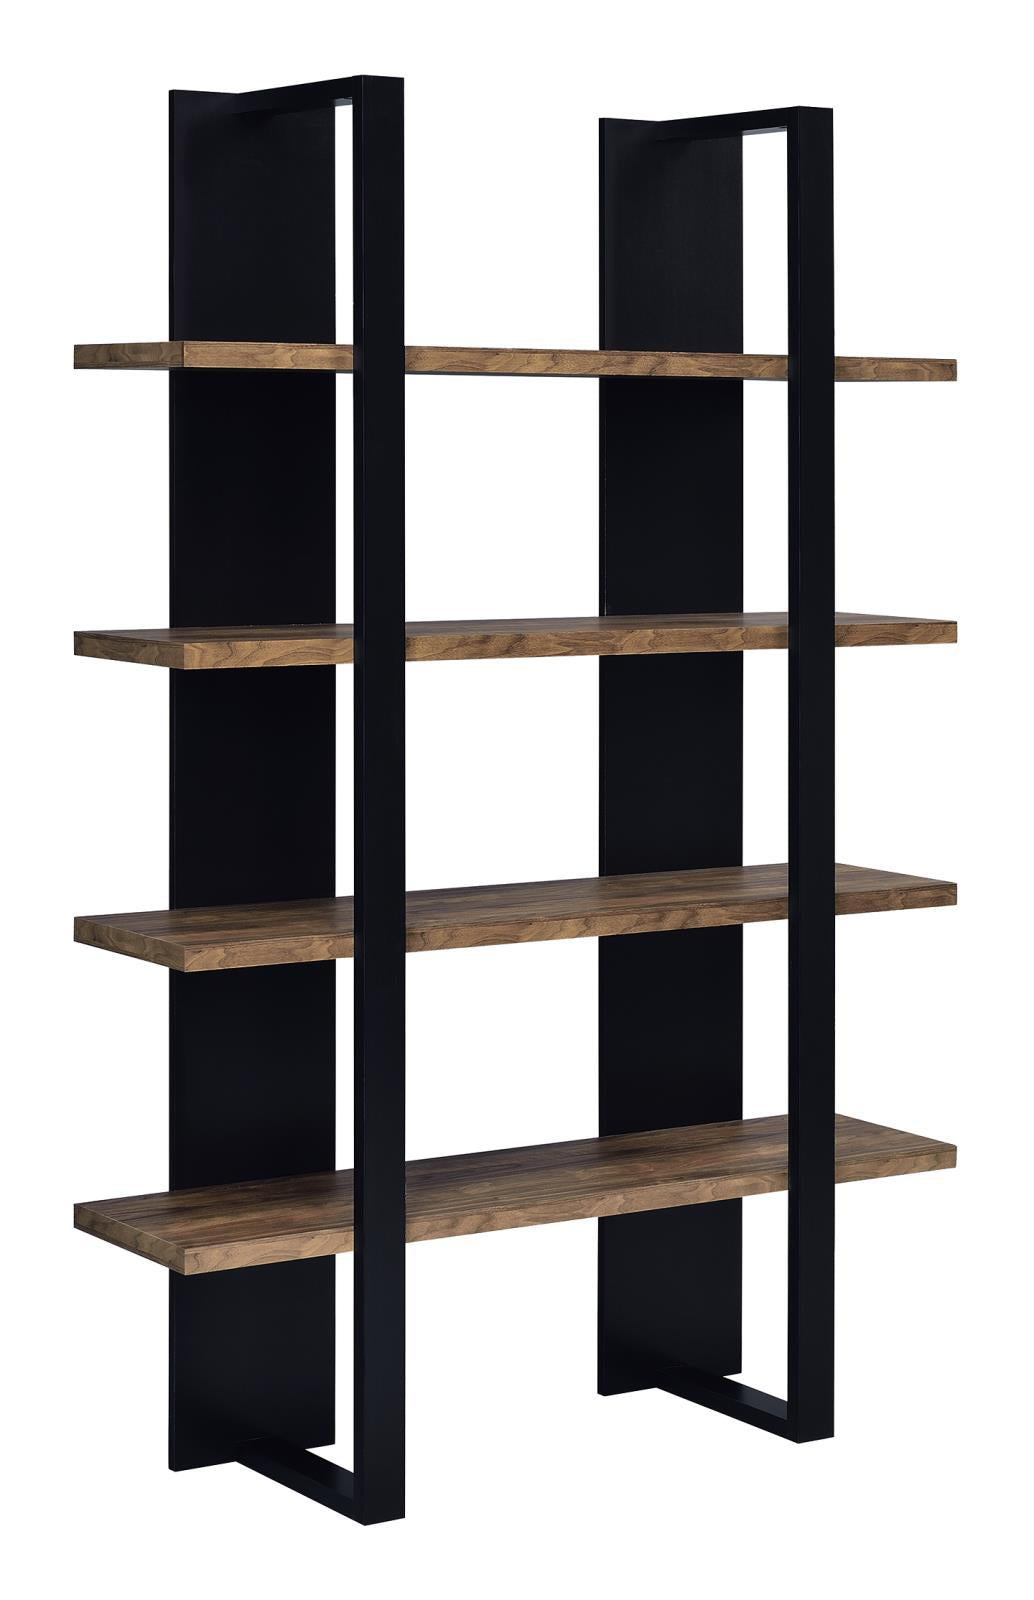 Danbrook Bookcase with 4 Full-length Shelves  Half Price Furniture